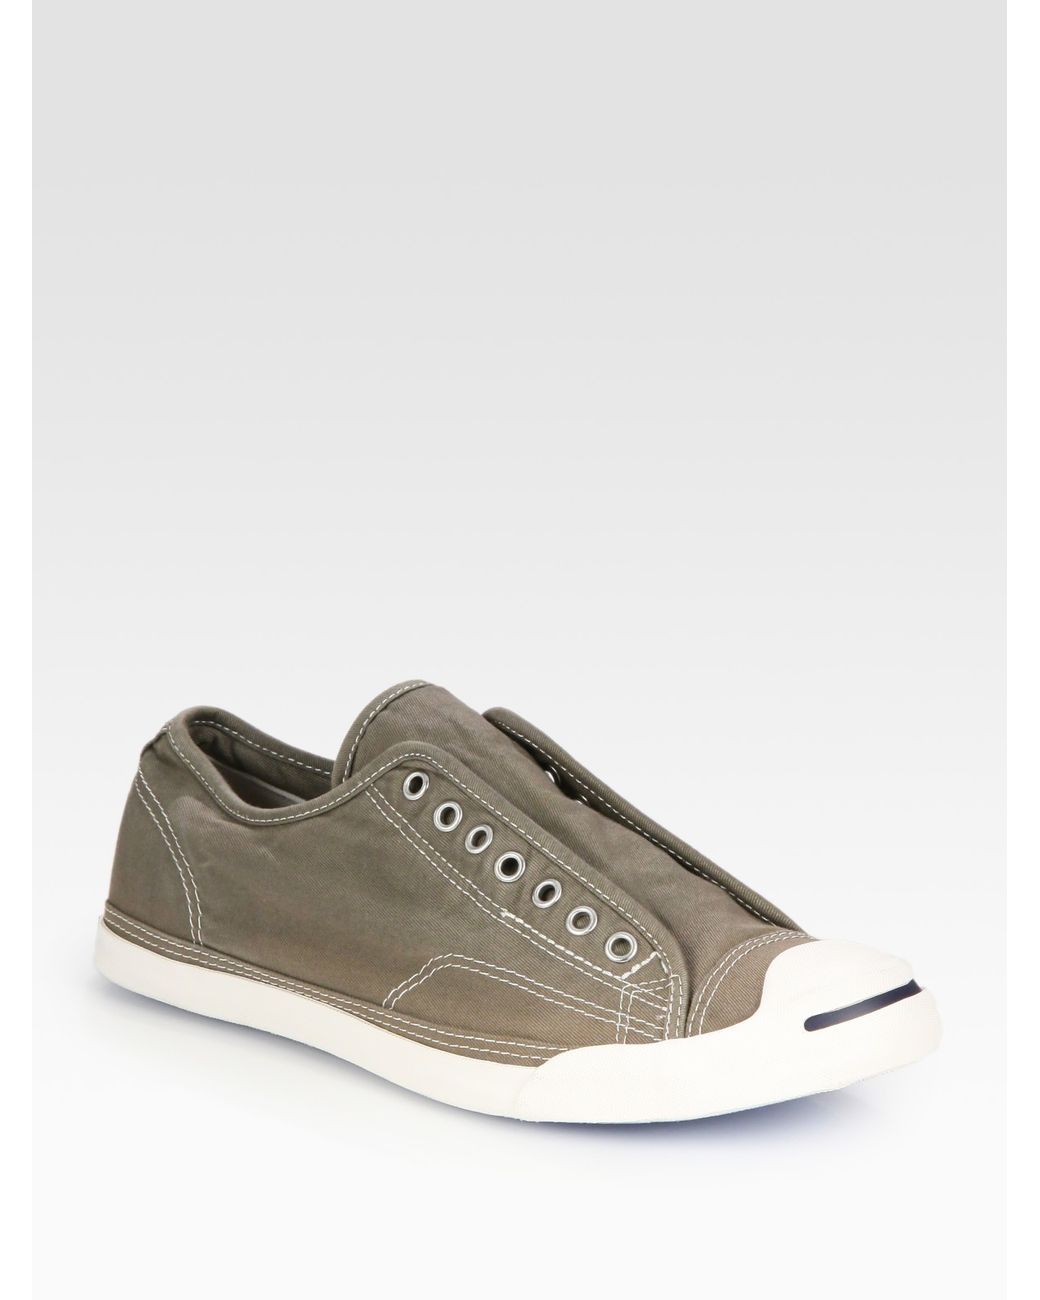 Converse Jack Purcell Laceless Canvas Sneakers in Green for Men | Lyst